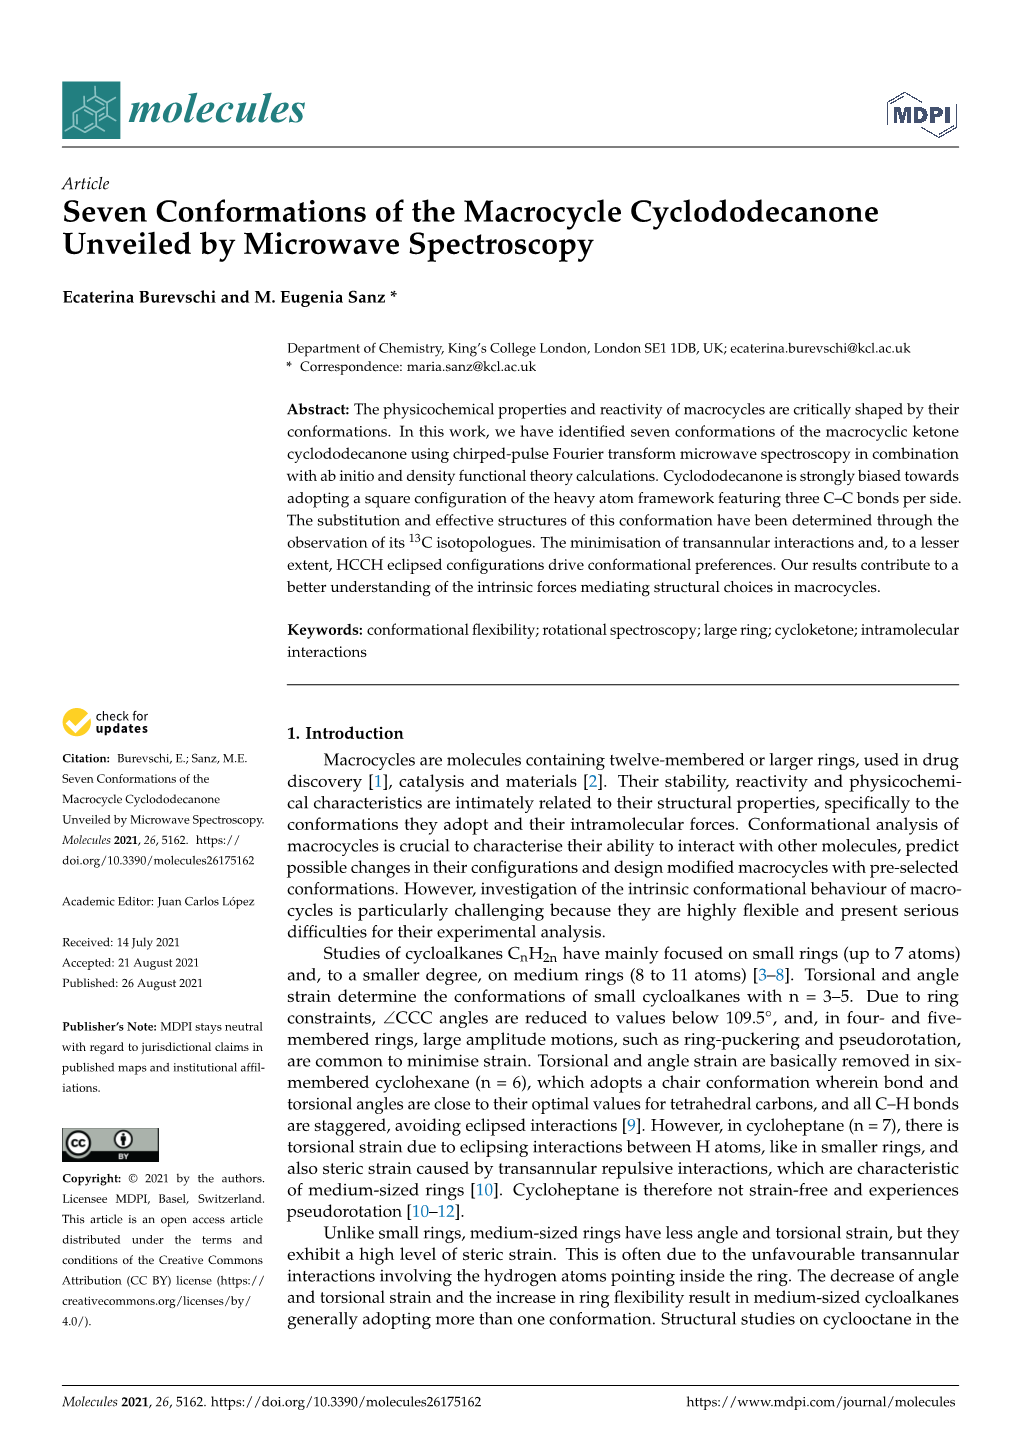 Seven Conformations of the Macrocycle Cyclododecanone Unveiled by Microwave Spectroscopy